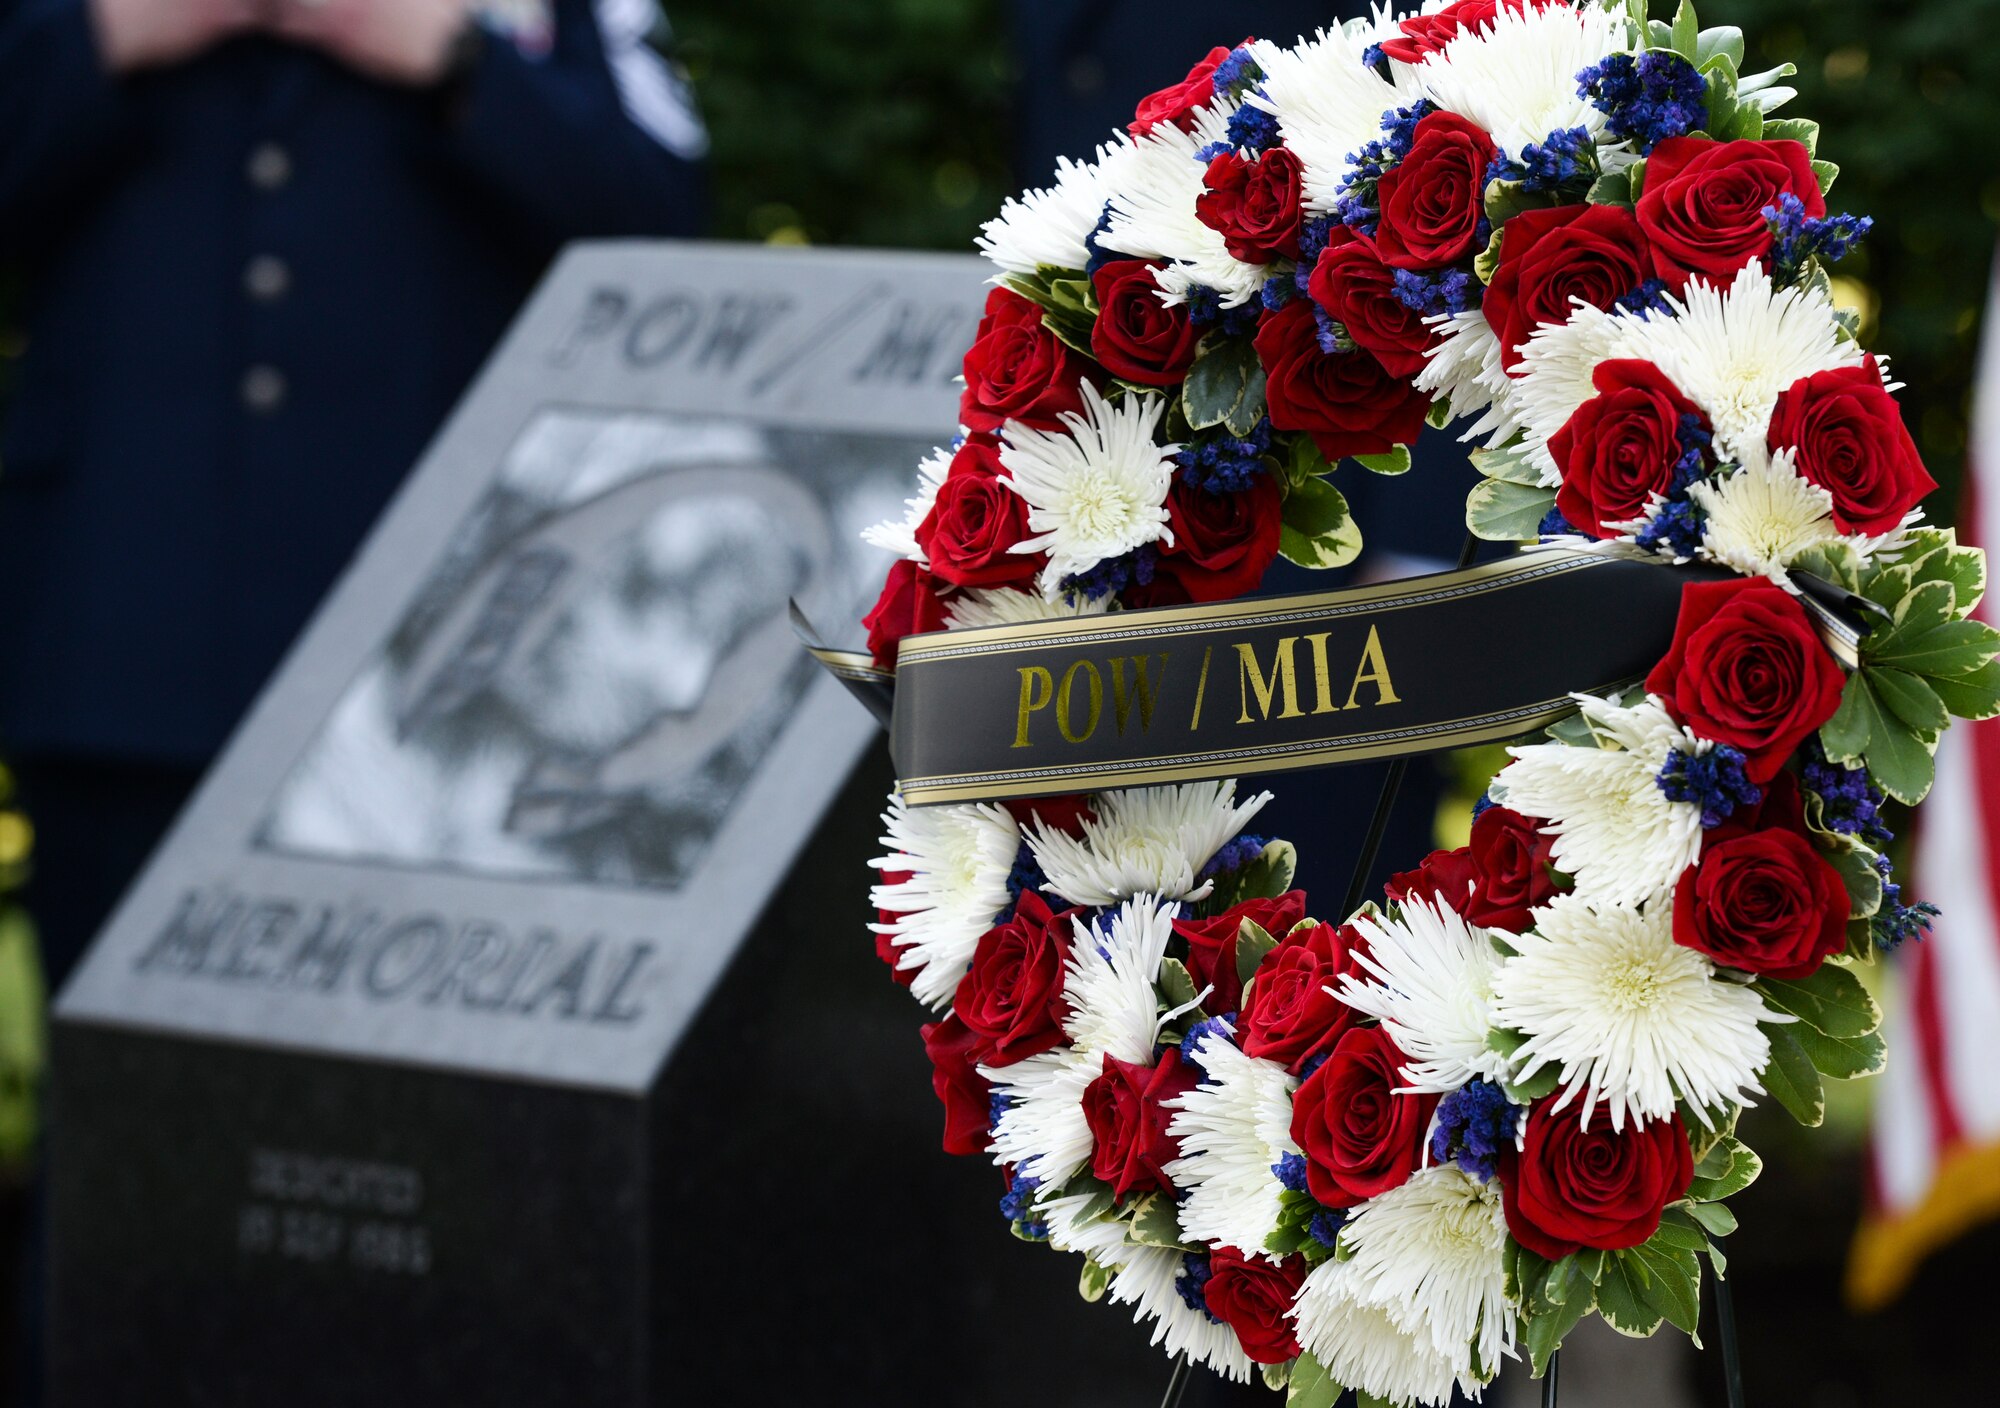 A wreath sits on a stand at the POW/MIA memorial, Wright-Patterson Air Force Base, Ohio, Sept. 21, 2018. The wreath was placed during a POW/MIA ceremony which was held for base personnel a part of National POW/MIA Recognition Day. (U.S. Air Force photo by Wesley Farnsworth)